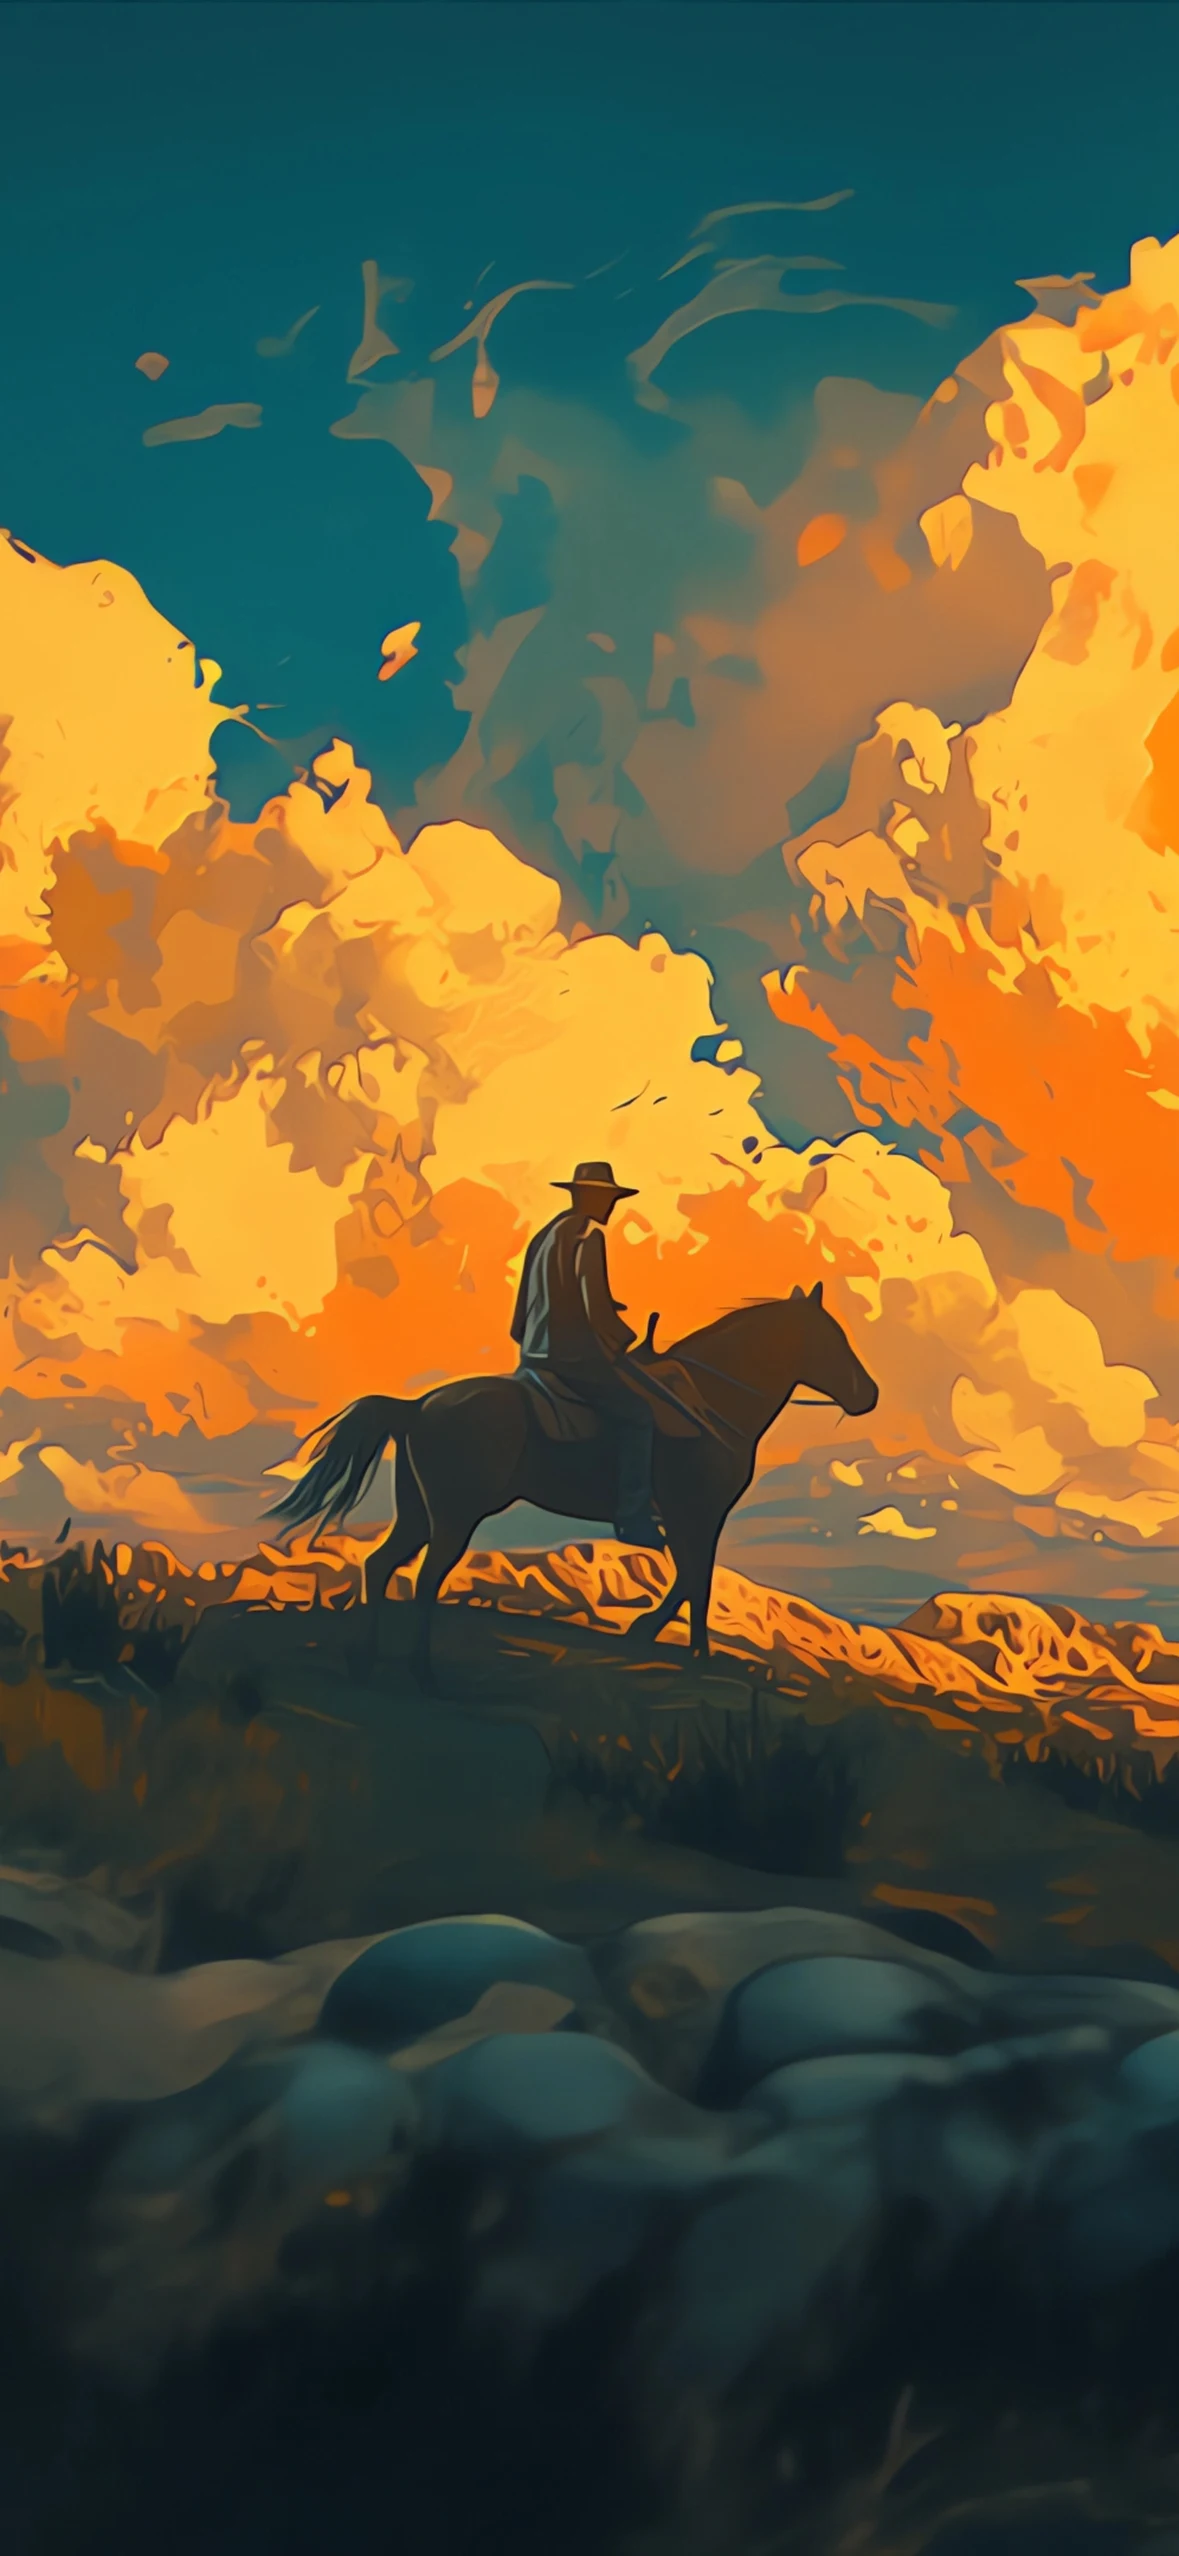 Silhouette of a lone rider on horseback atop a hill against a backdrop of stunning golden clouds at sunset, in a Western-style landscape.